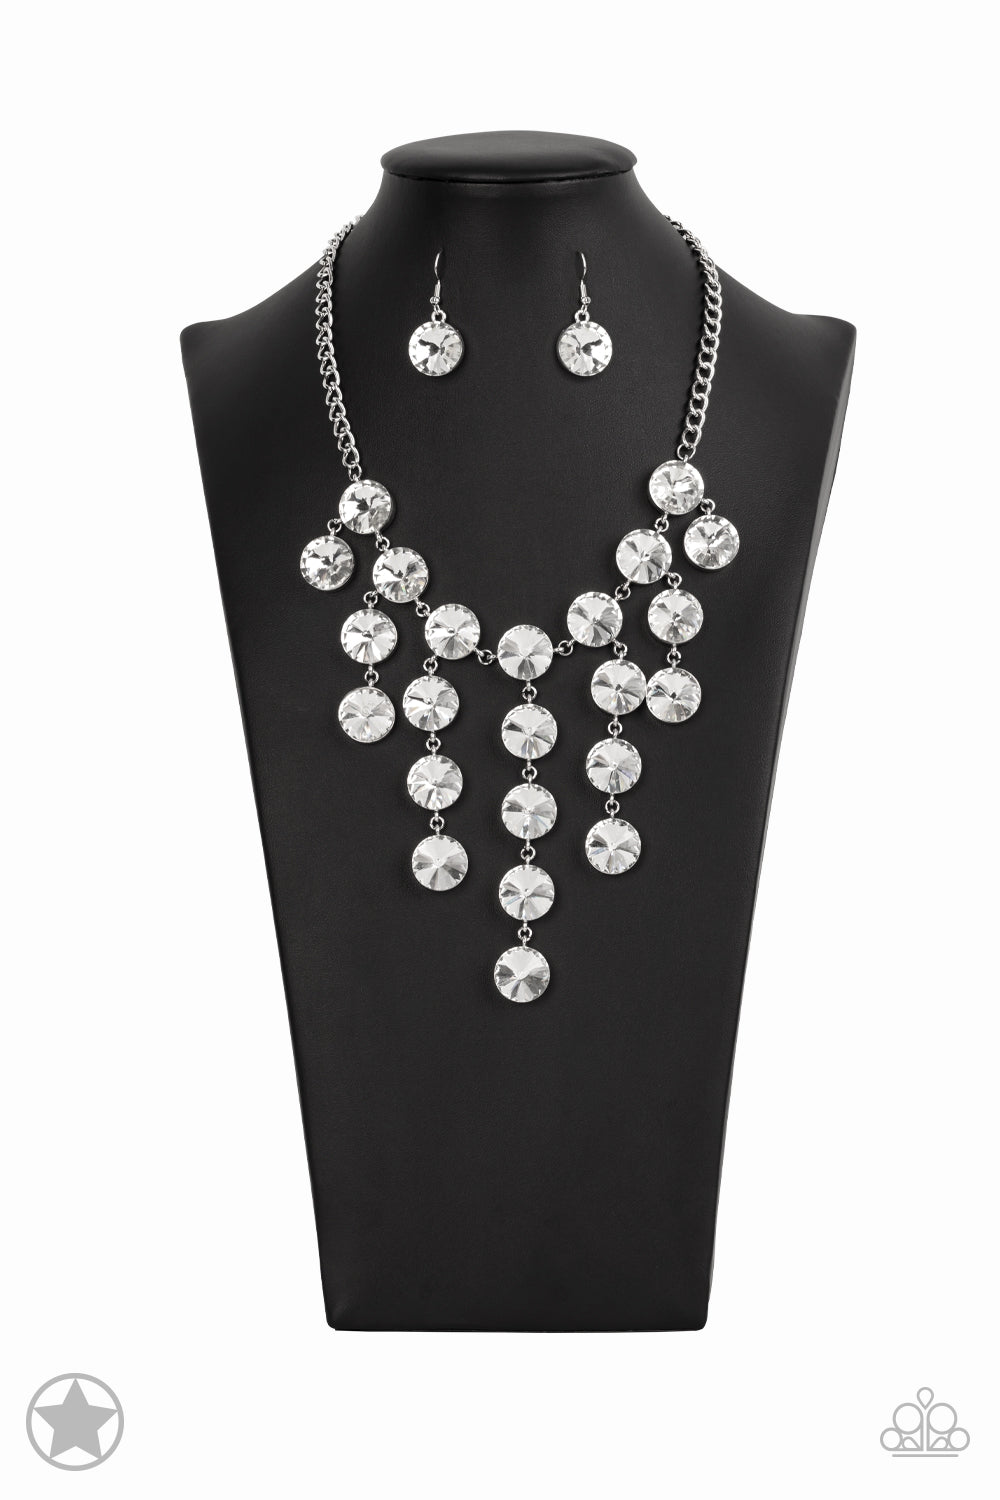 Spotlight Stunner Paparazzi Accessories Necklace with Earrings